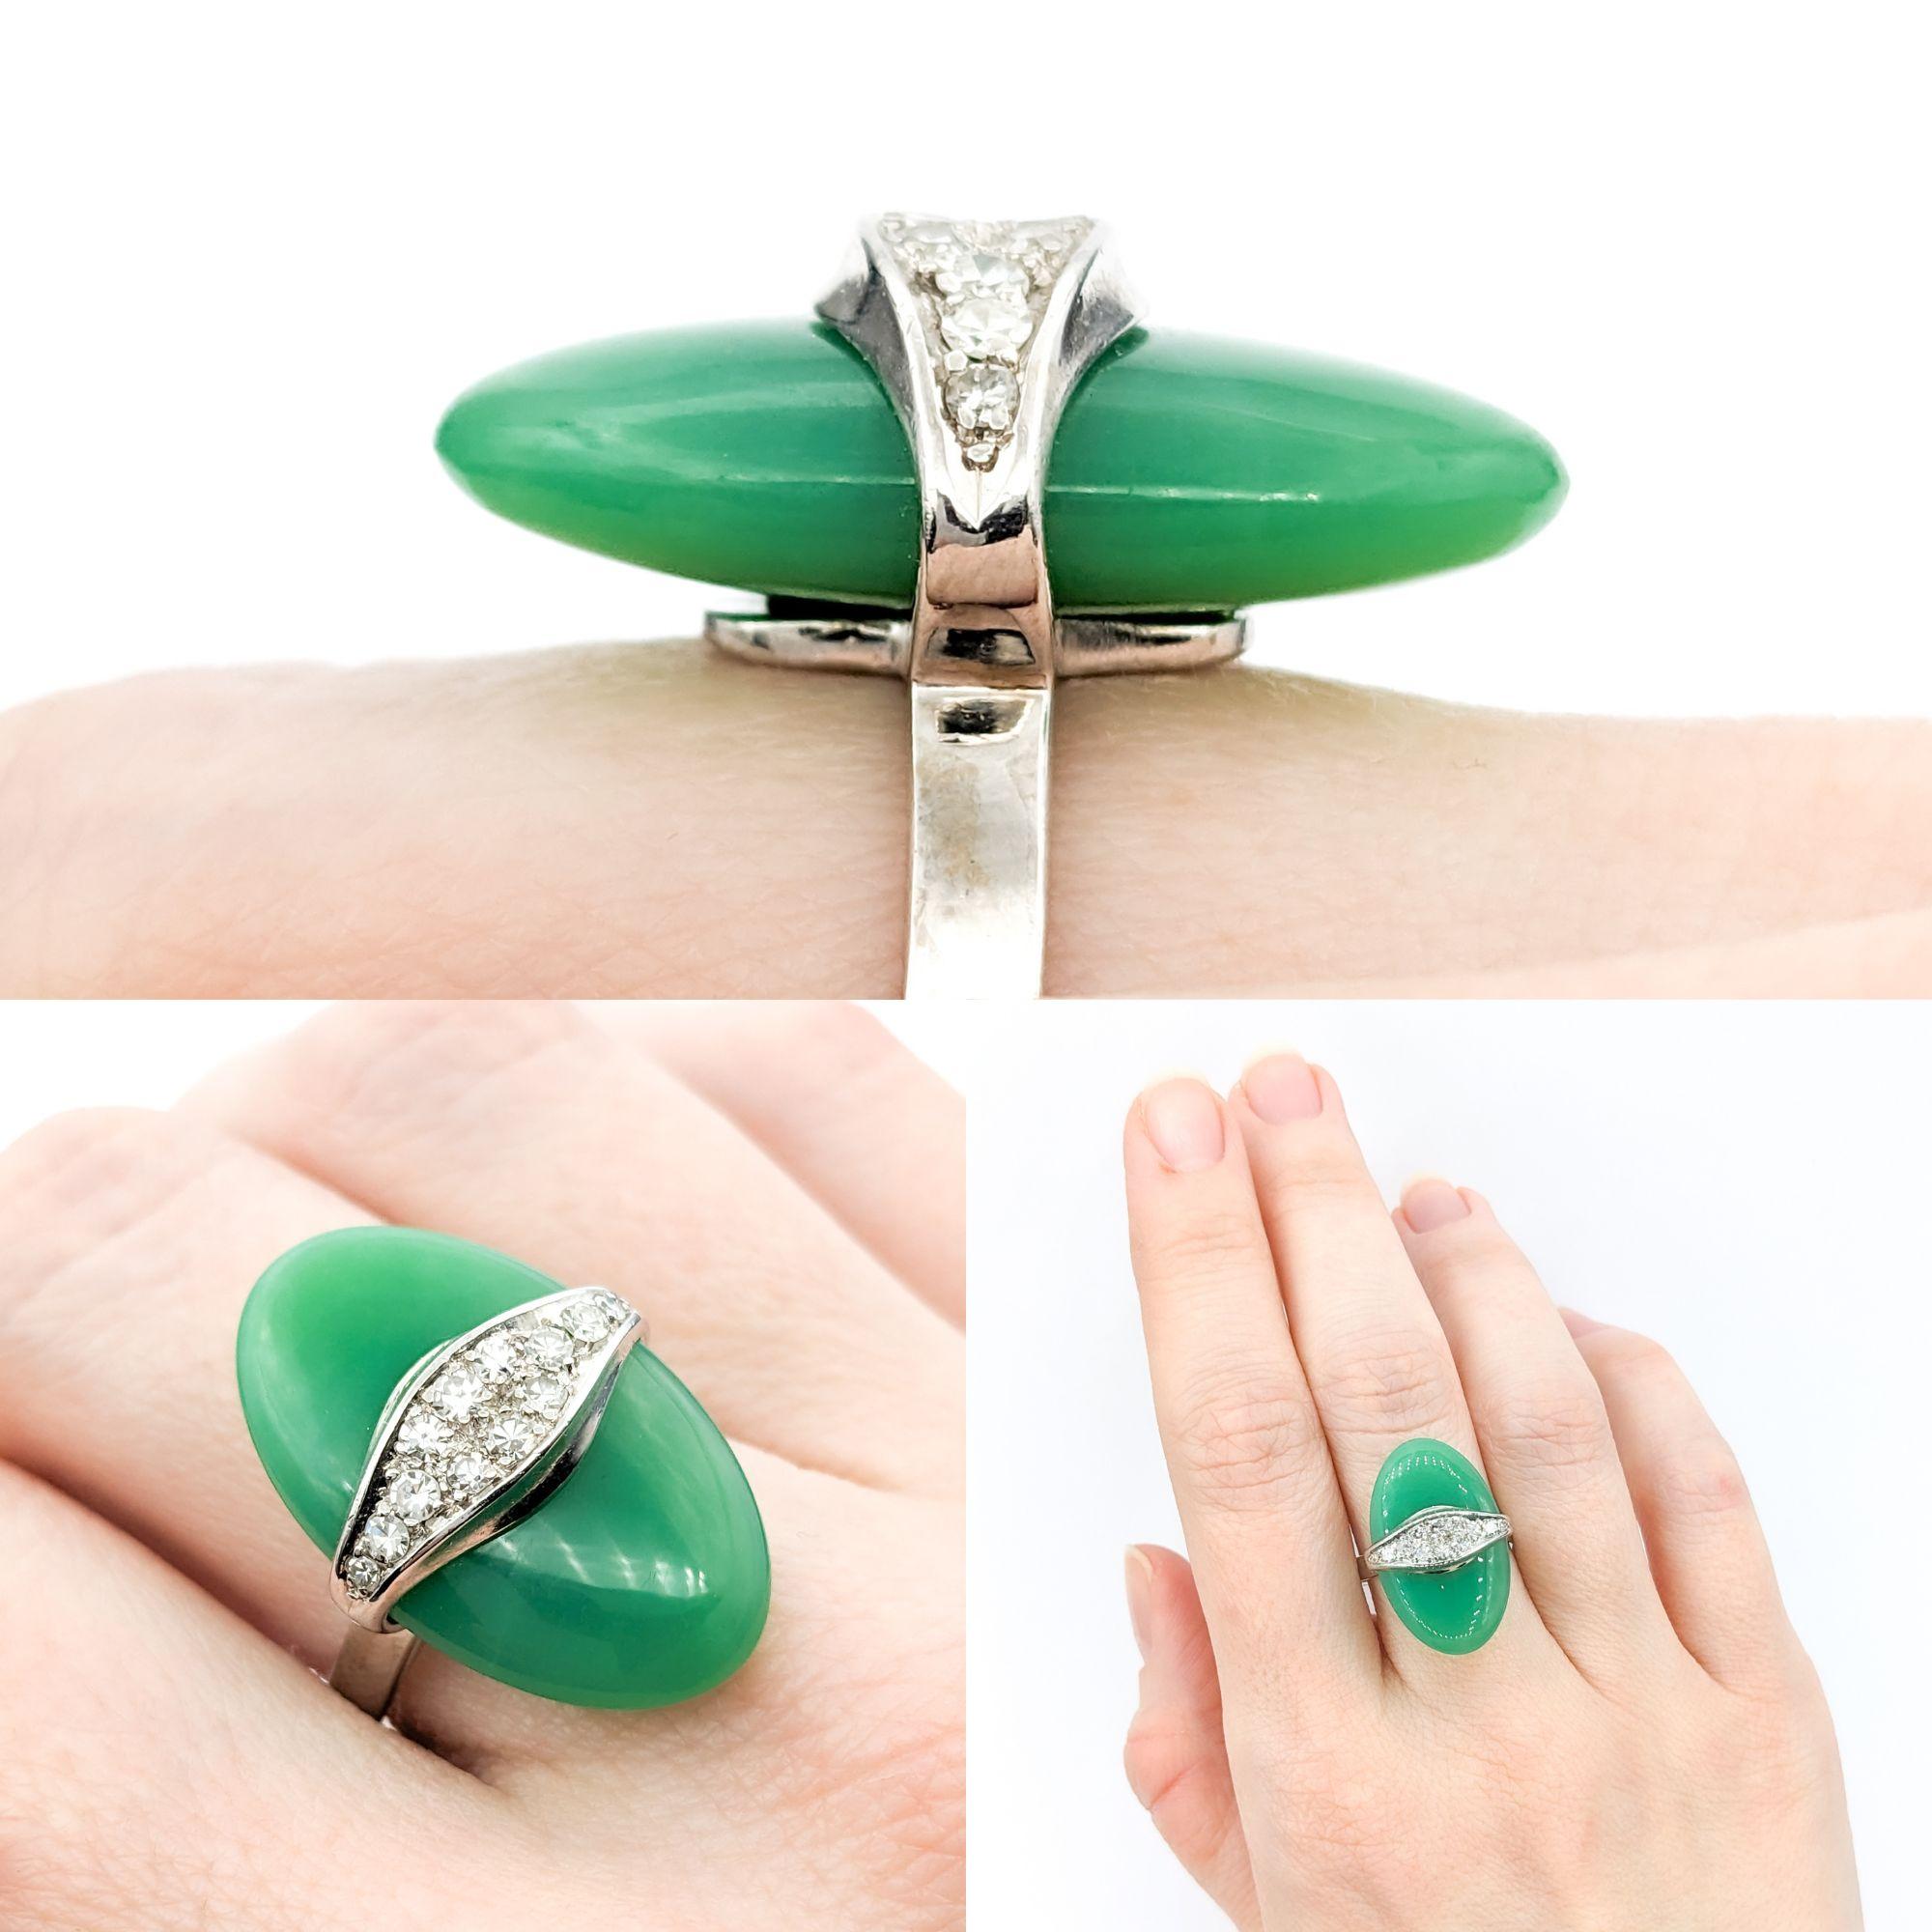 Modern Jade & Diamond Cocktail Ring

This Beautiful Ring is crafted in 14kw White Gold and features .33ctw Round Diamonds . The Sparkly Diamonds are VS2 clarity & F-G color. This piece is Sz8.5 but can be adjusted upon request. Weight is